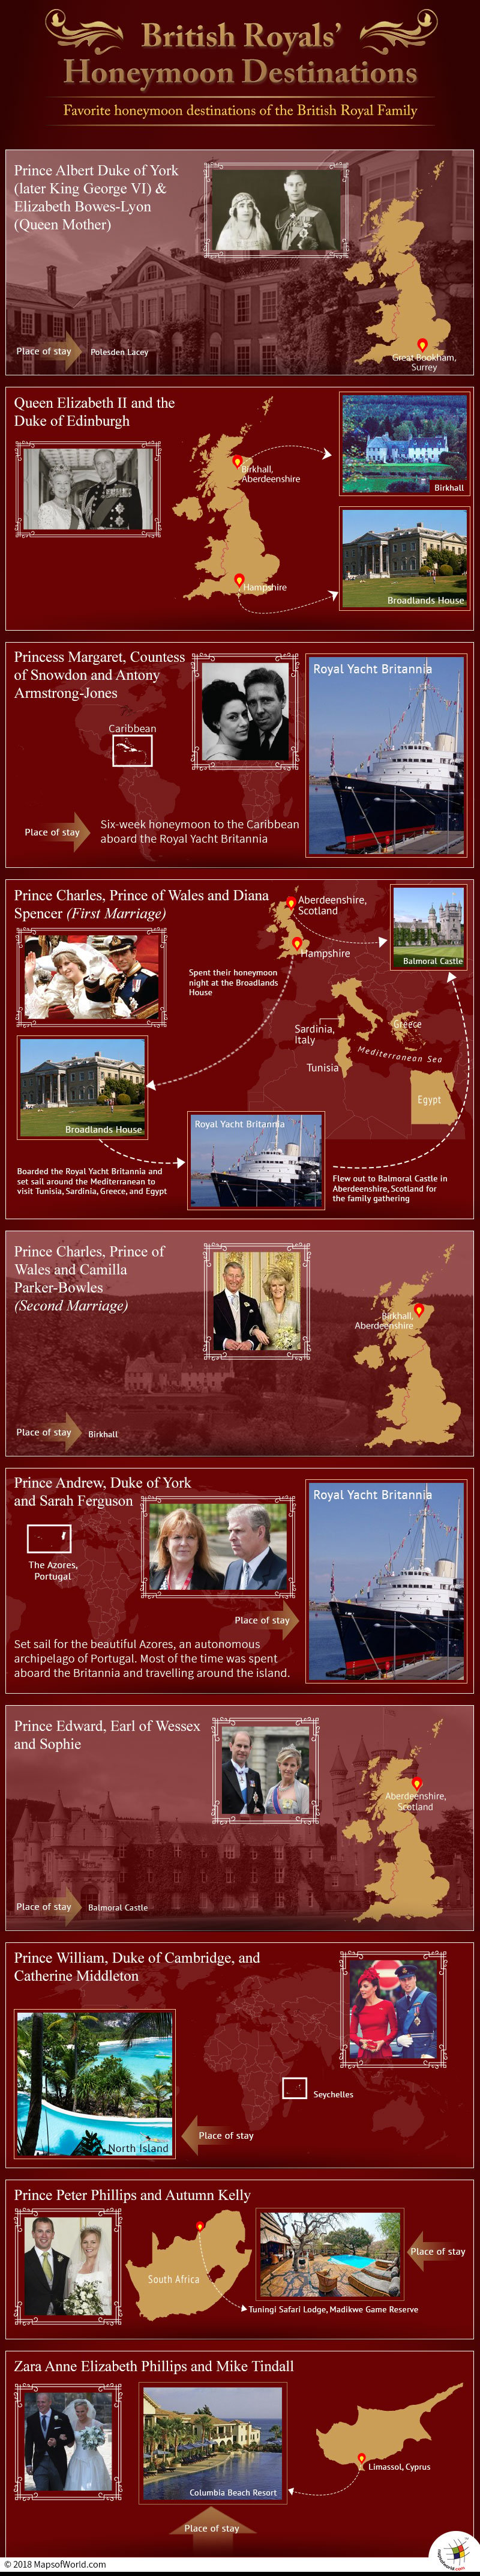 Infographic and map on Honeymoon Destinations of British Royals